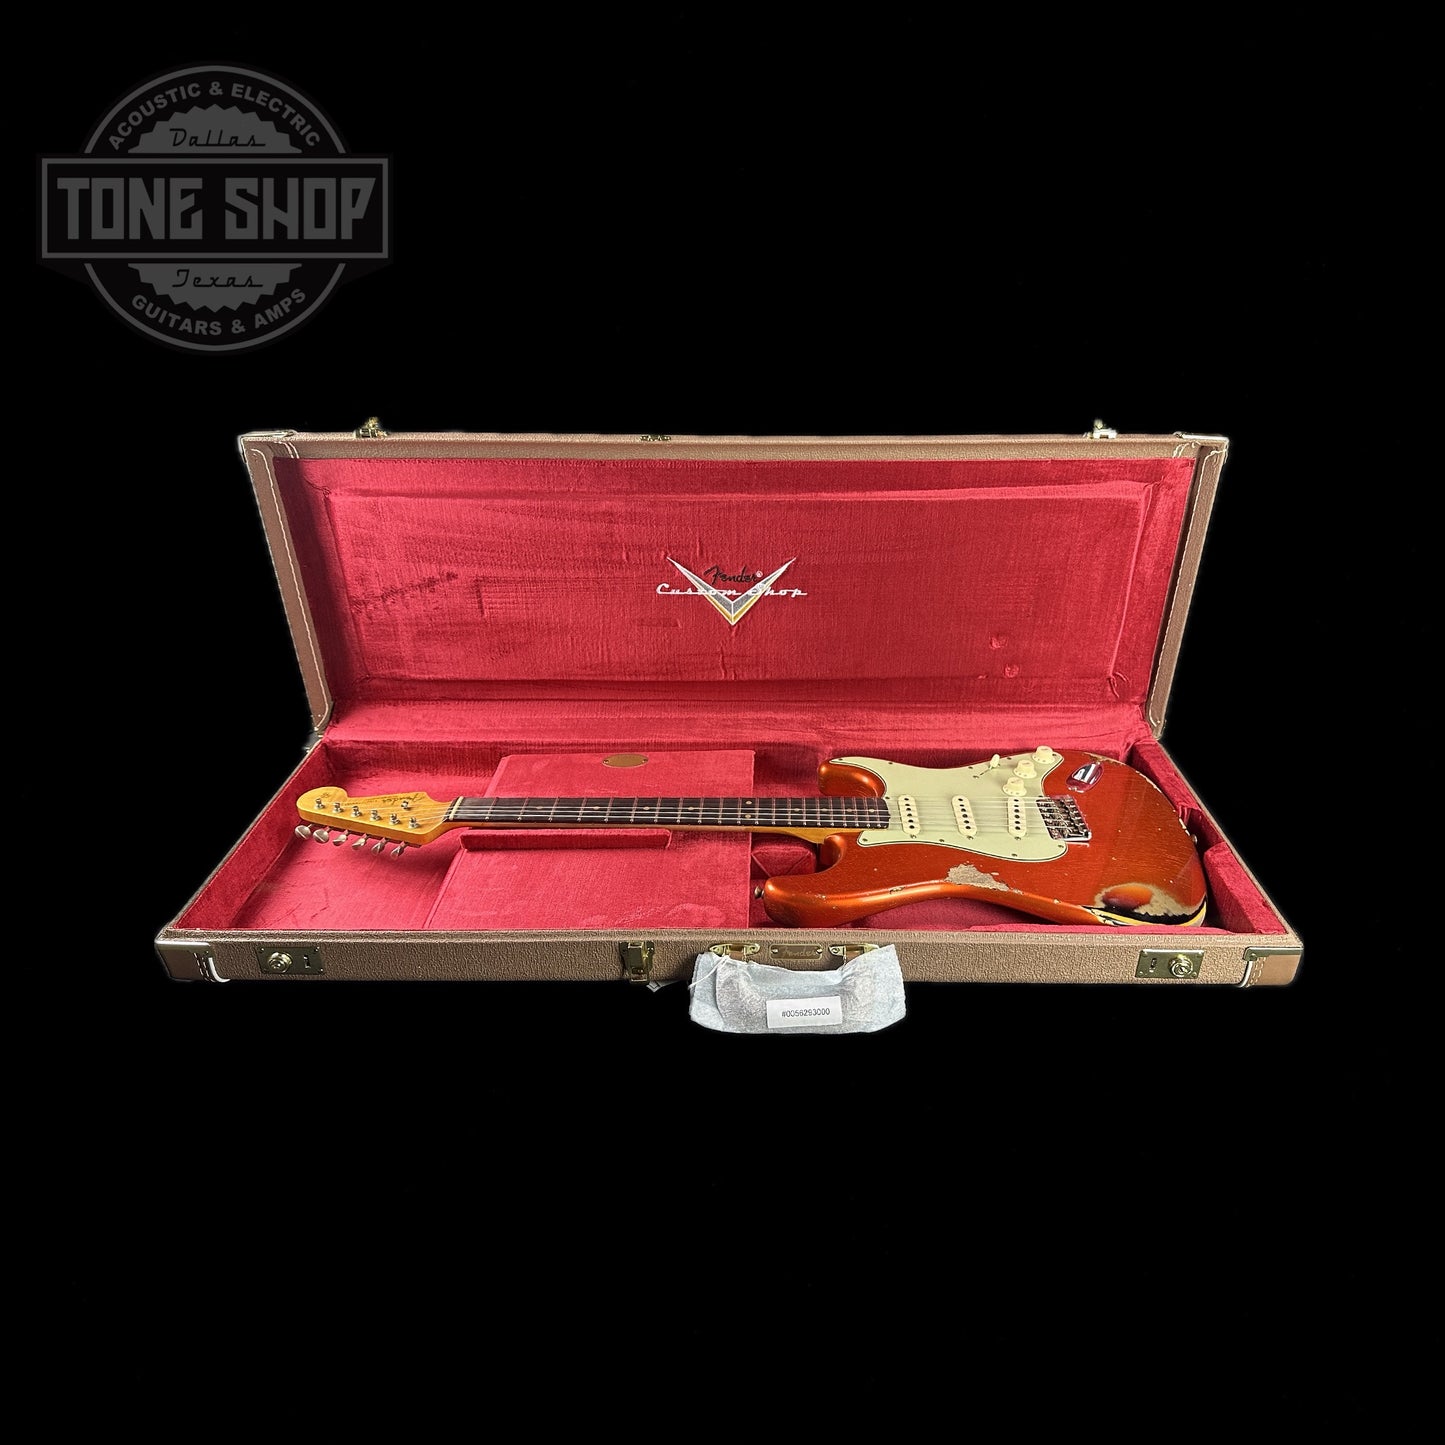 Fender Custom Shop Limited Edition 62 Strat Heavy Relic Aged Candy Tangerine Over 3 Color Sunburst in case.